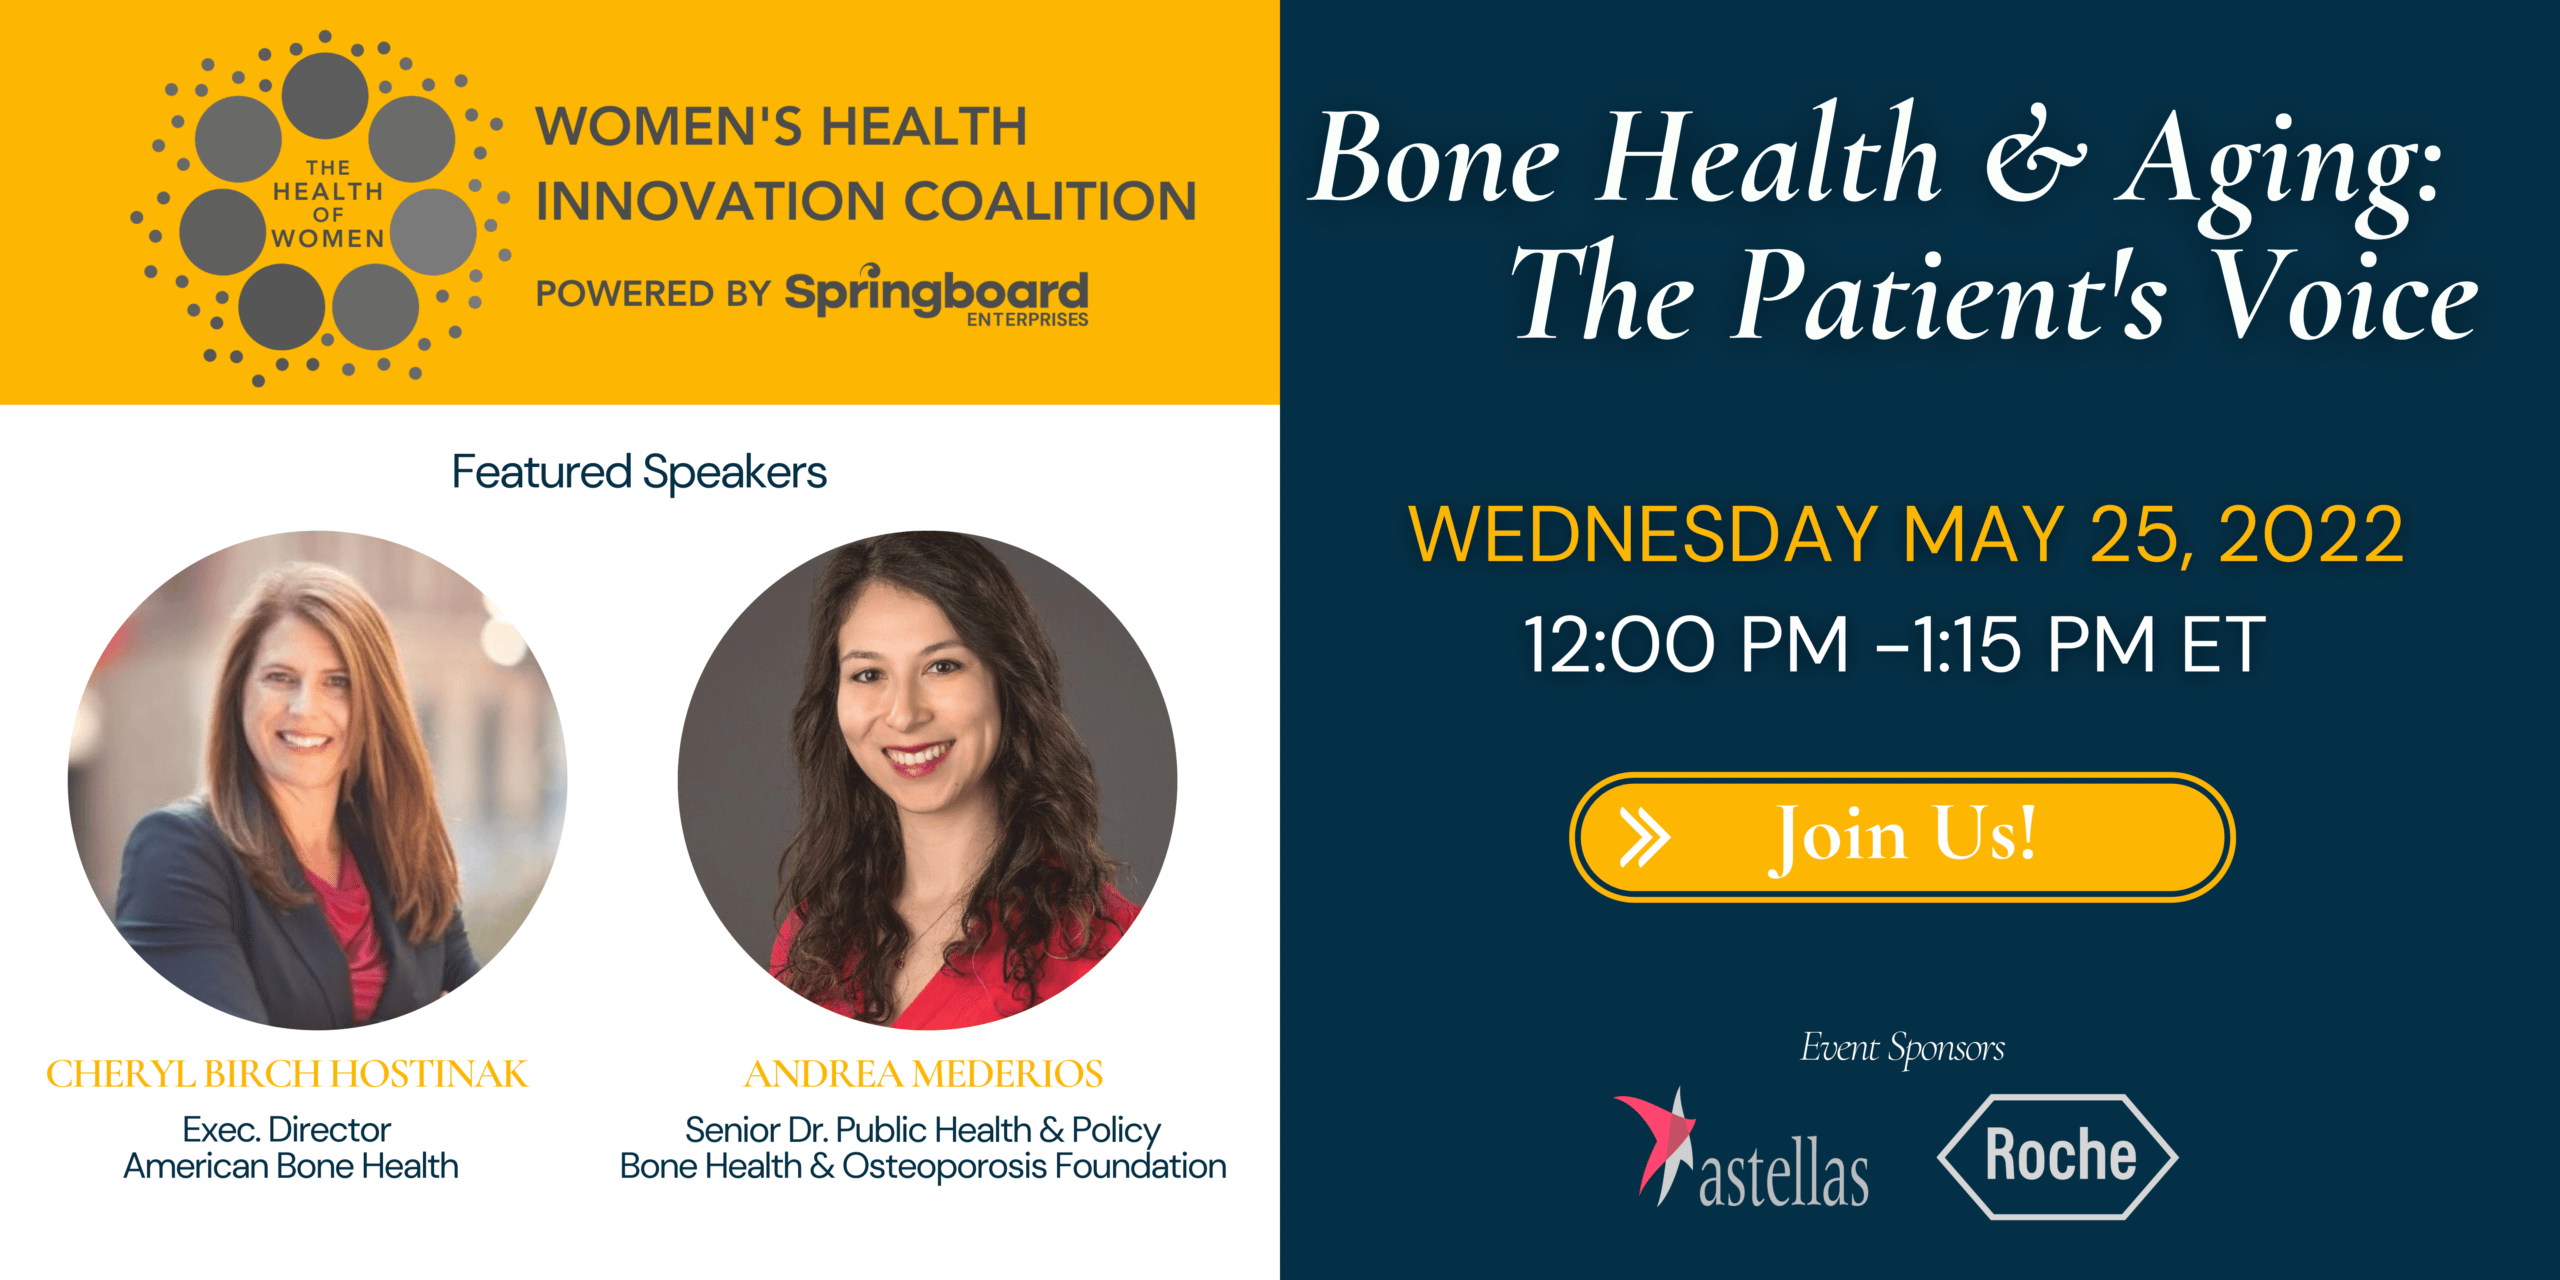 Women's Health Innovation Coalition Event on Bone Health and Aging